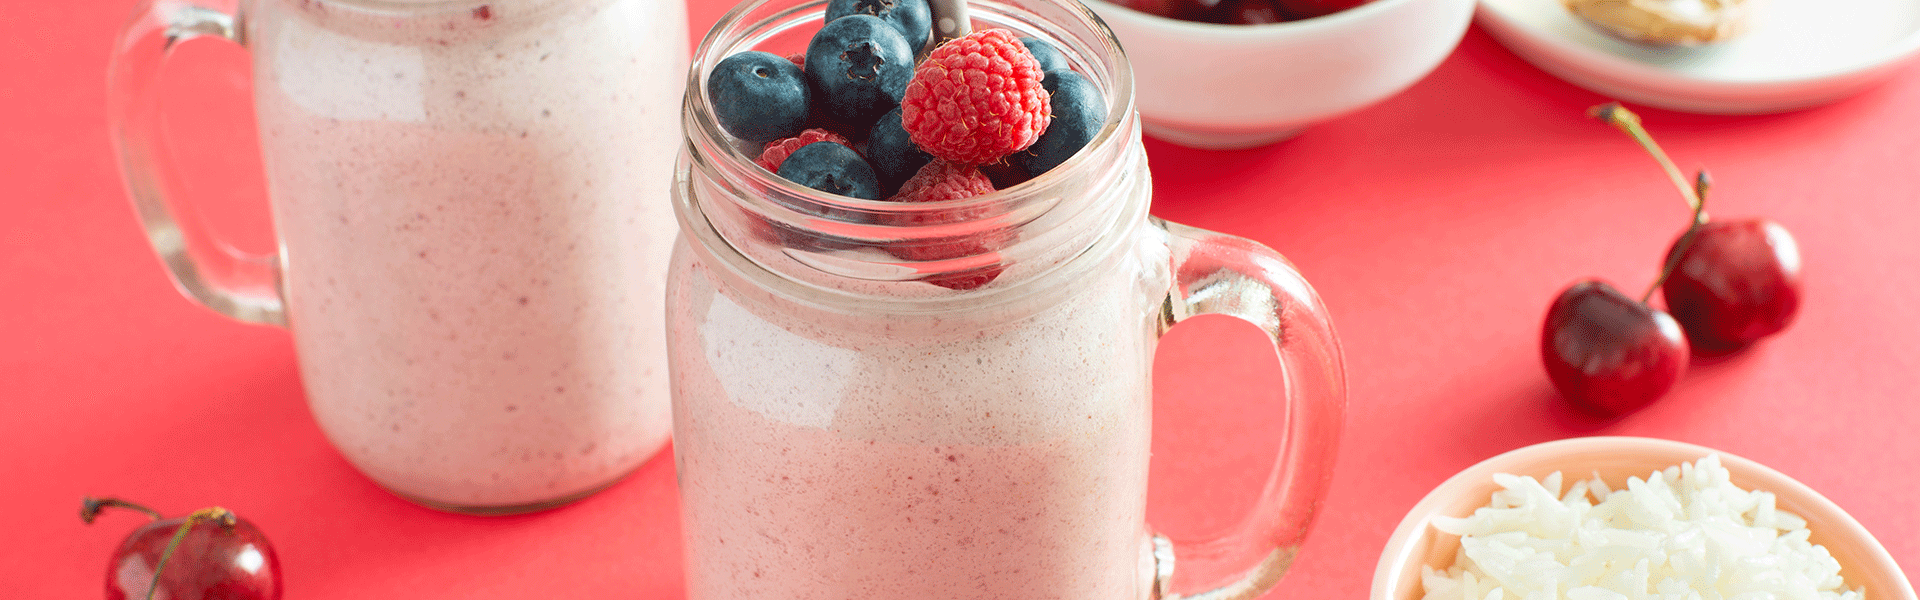 Peanut Butter, Berry, and Rice Breakfast Smoothie